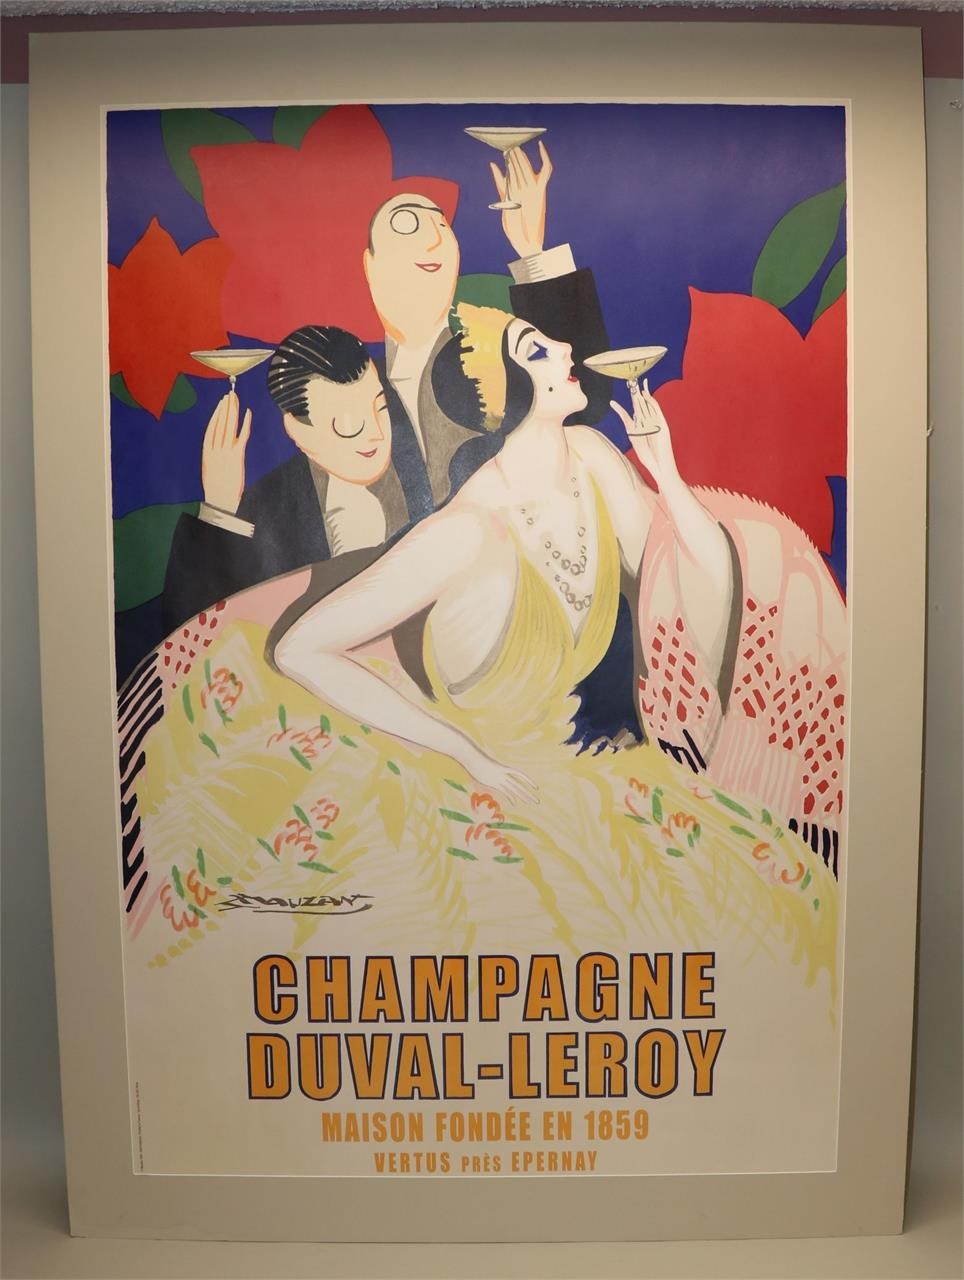 1999 Mauzan France Champagne Duval-Leroy Poster